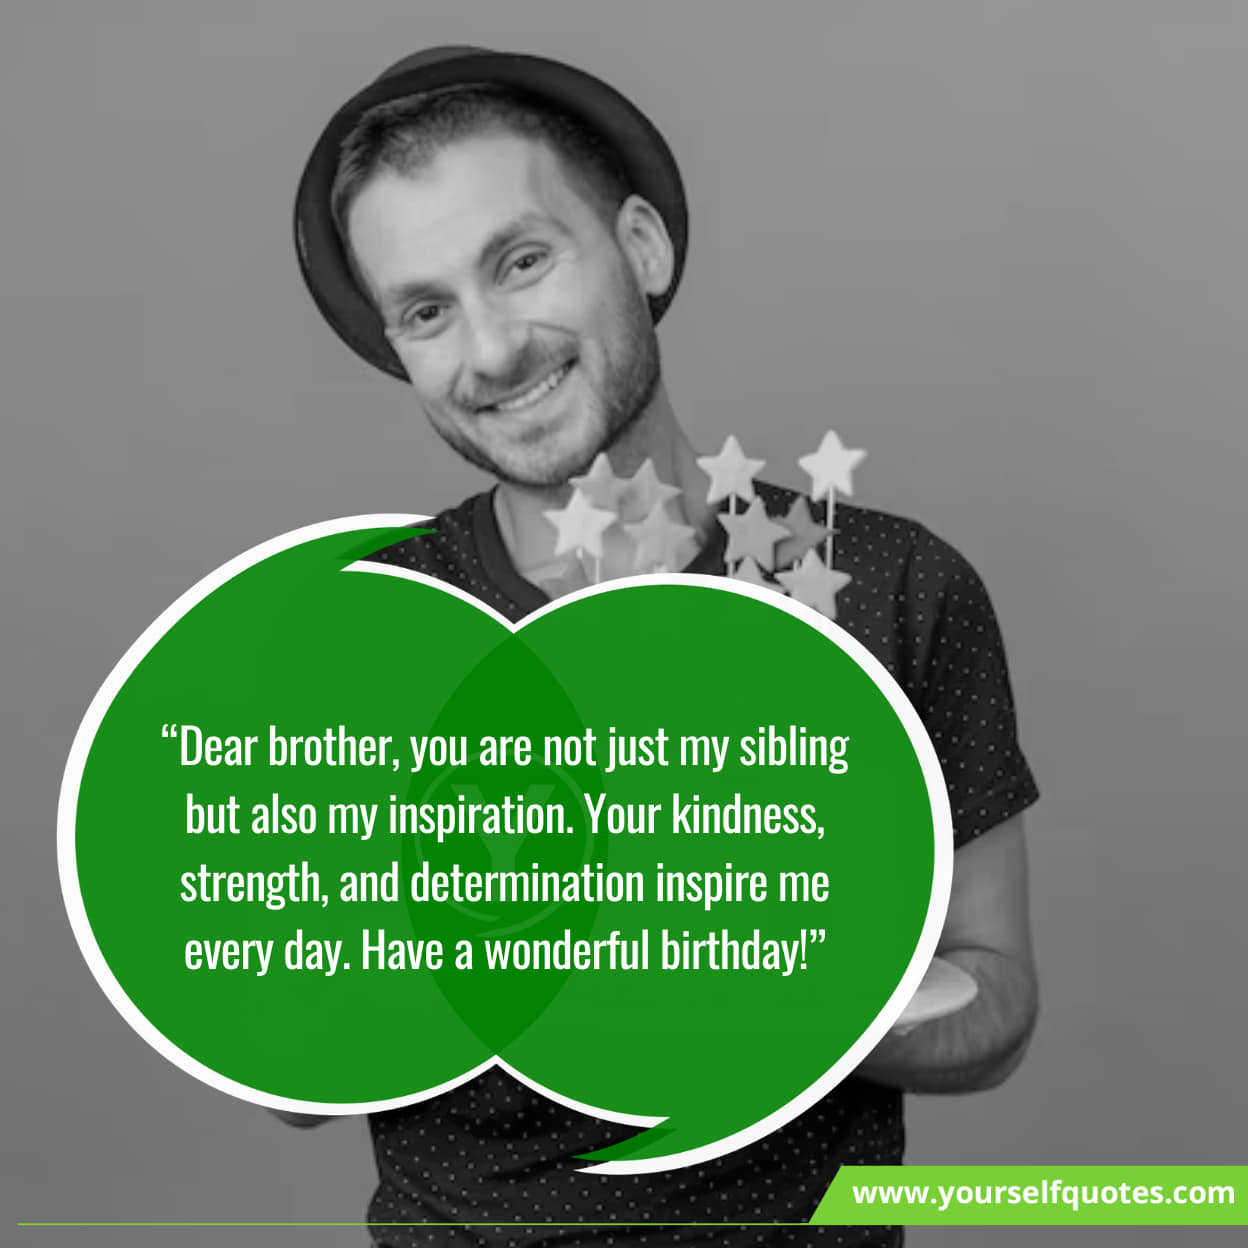 Warmest birthday wishes for brother